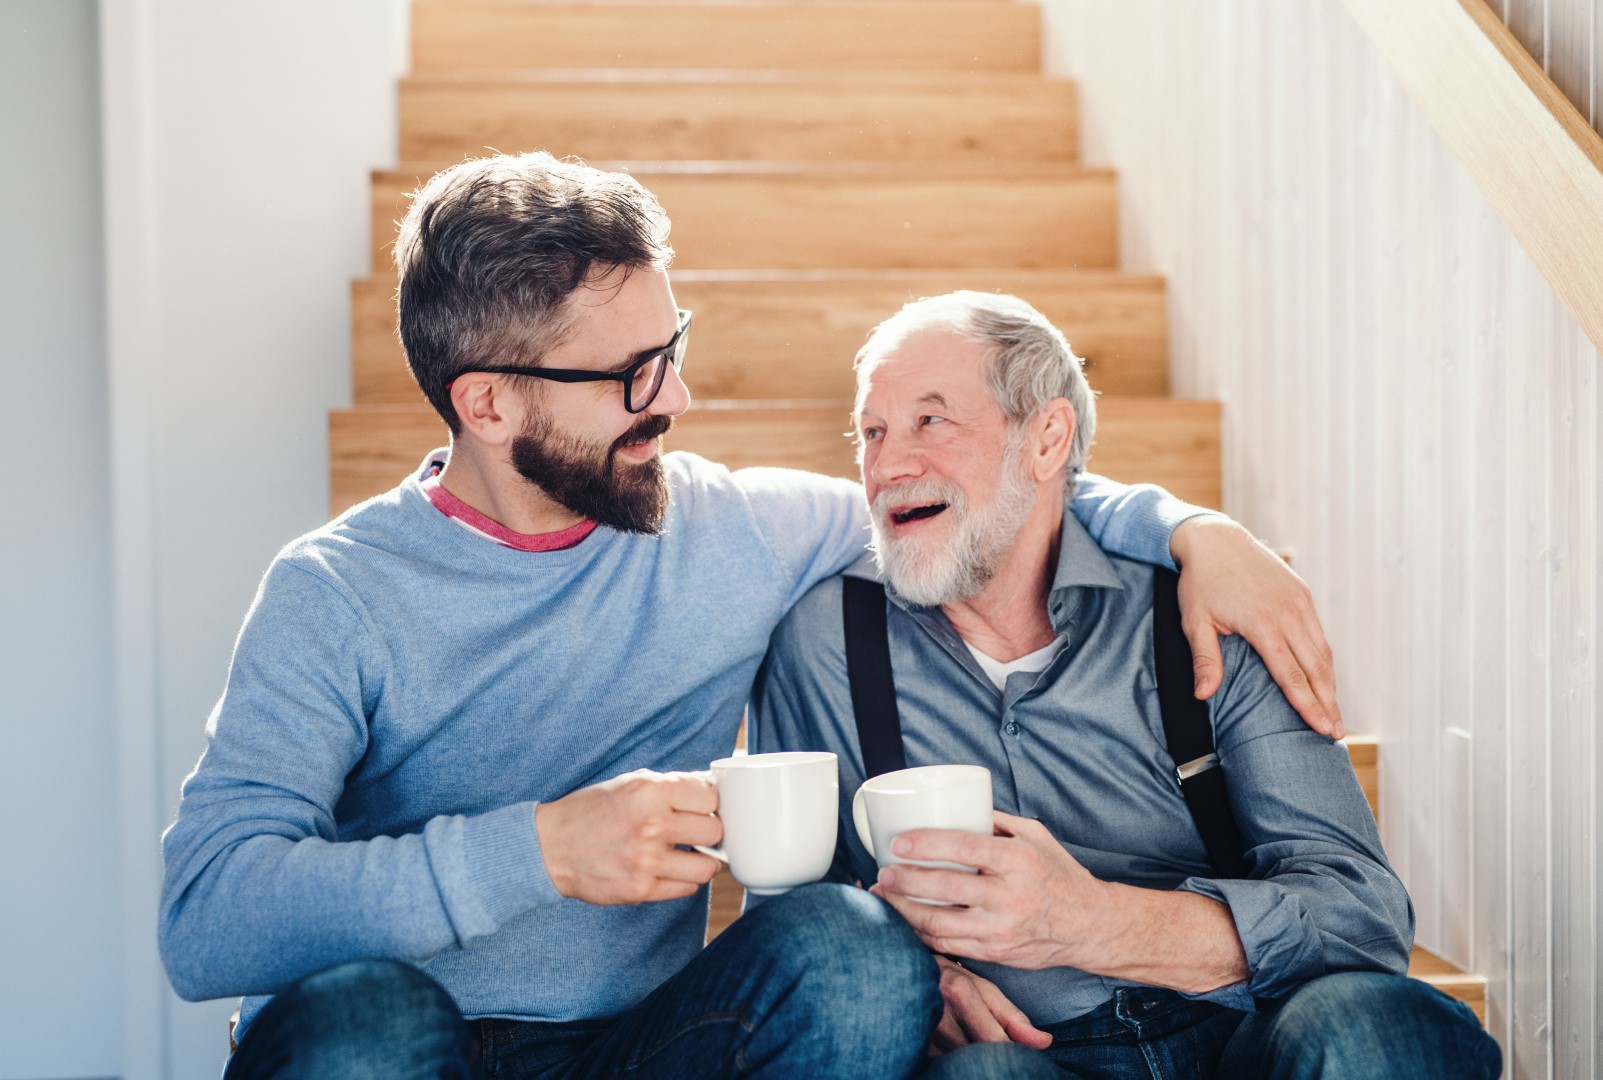 Father’s Day Gift Ideas for Senior Dads